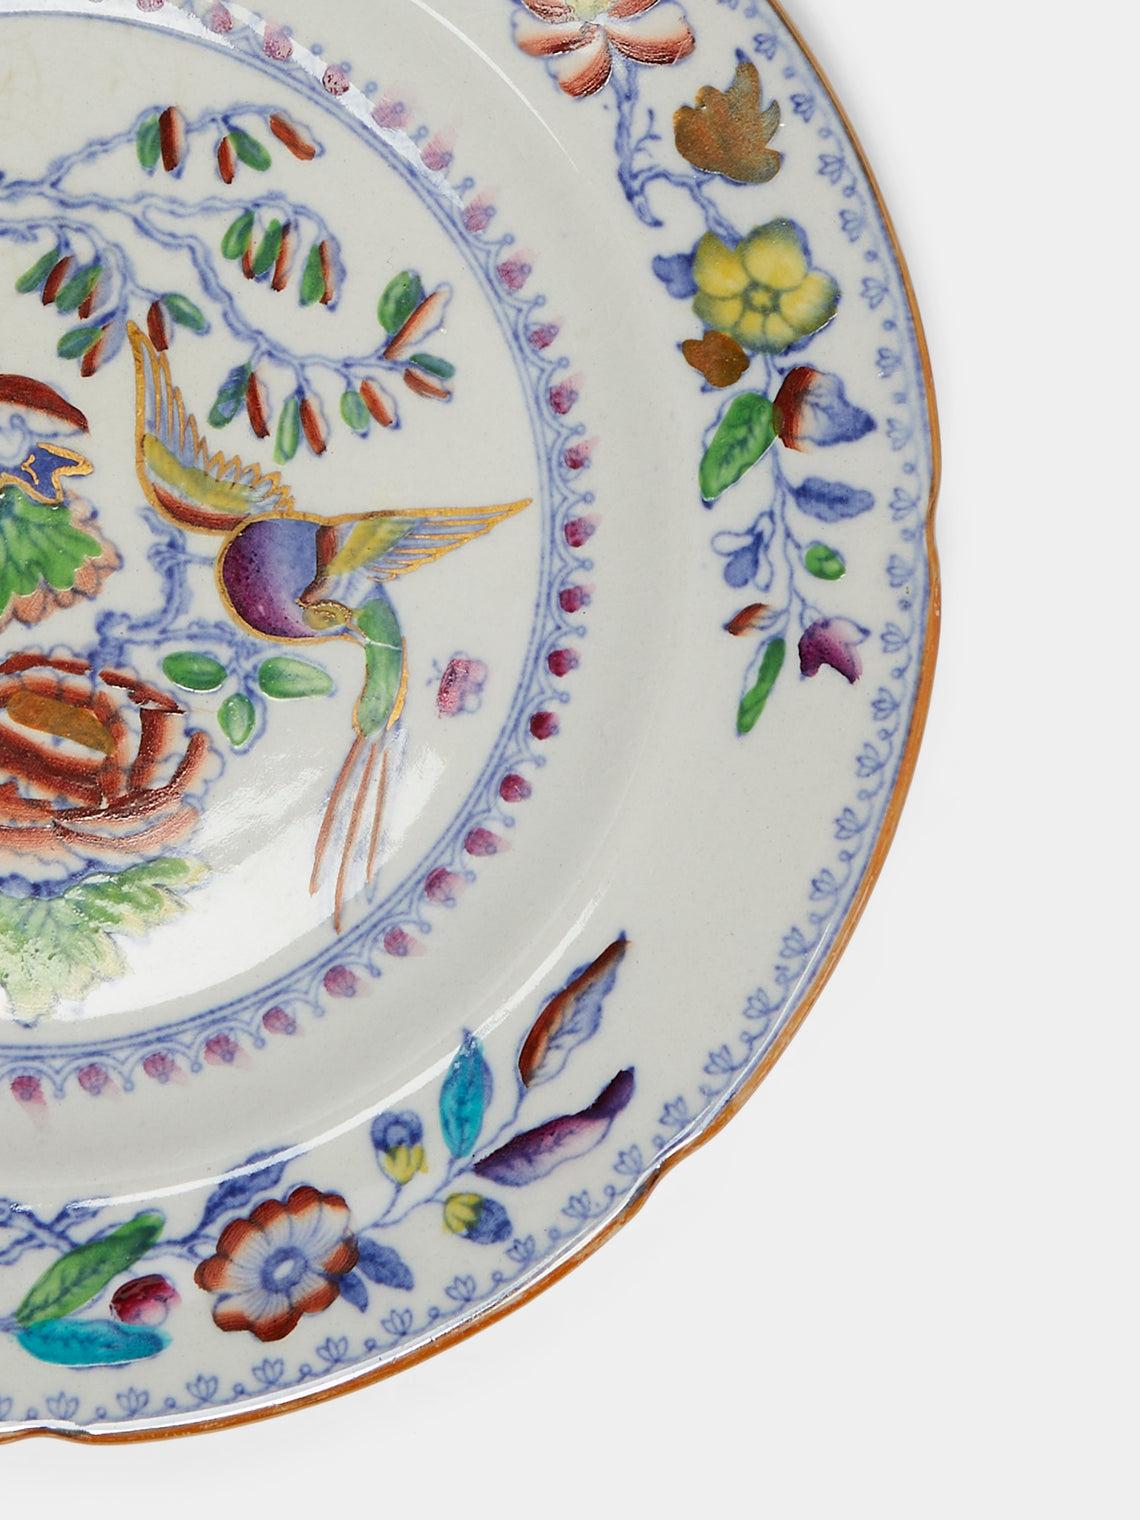 Antique and Vintage - 1870s Flying Bird Mason Ironstone Tea Plate (Set of 10) - Multiple - ABASK